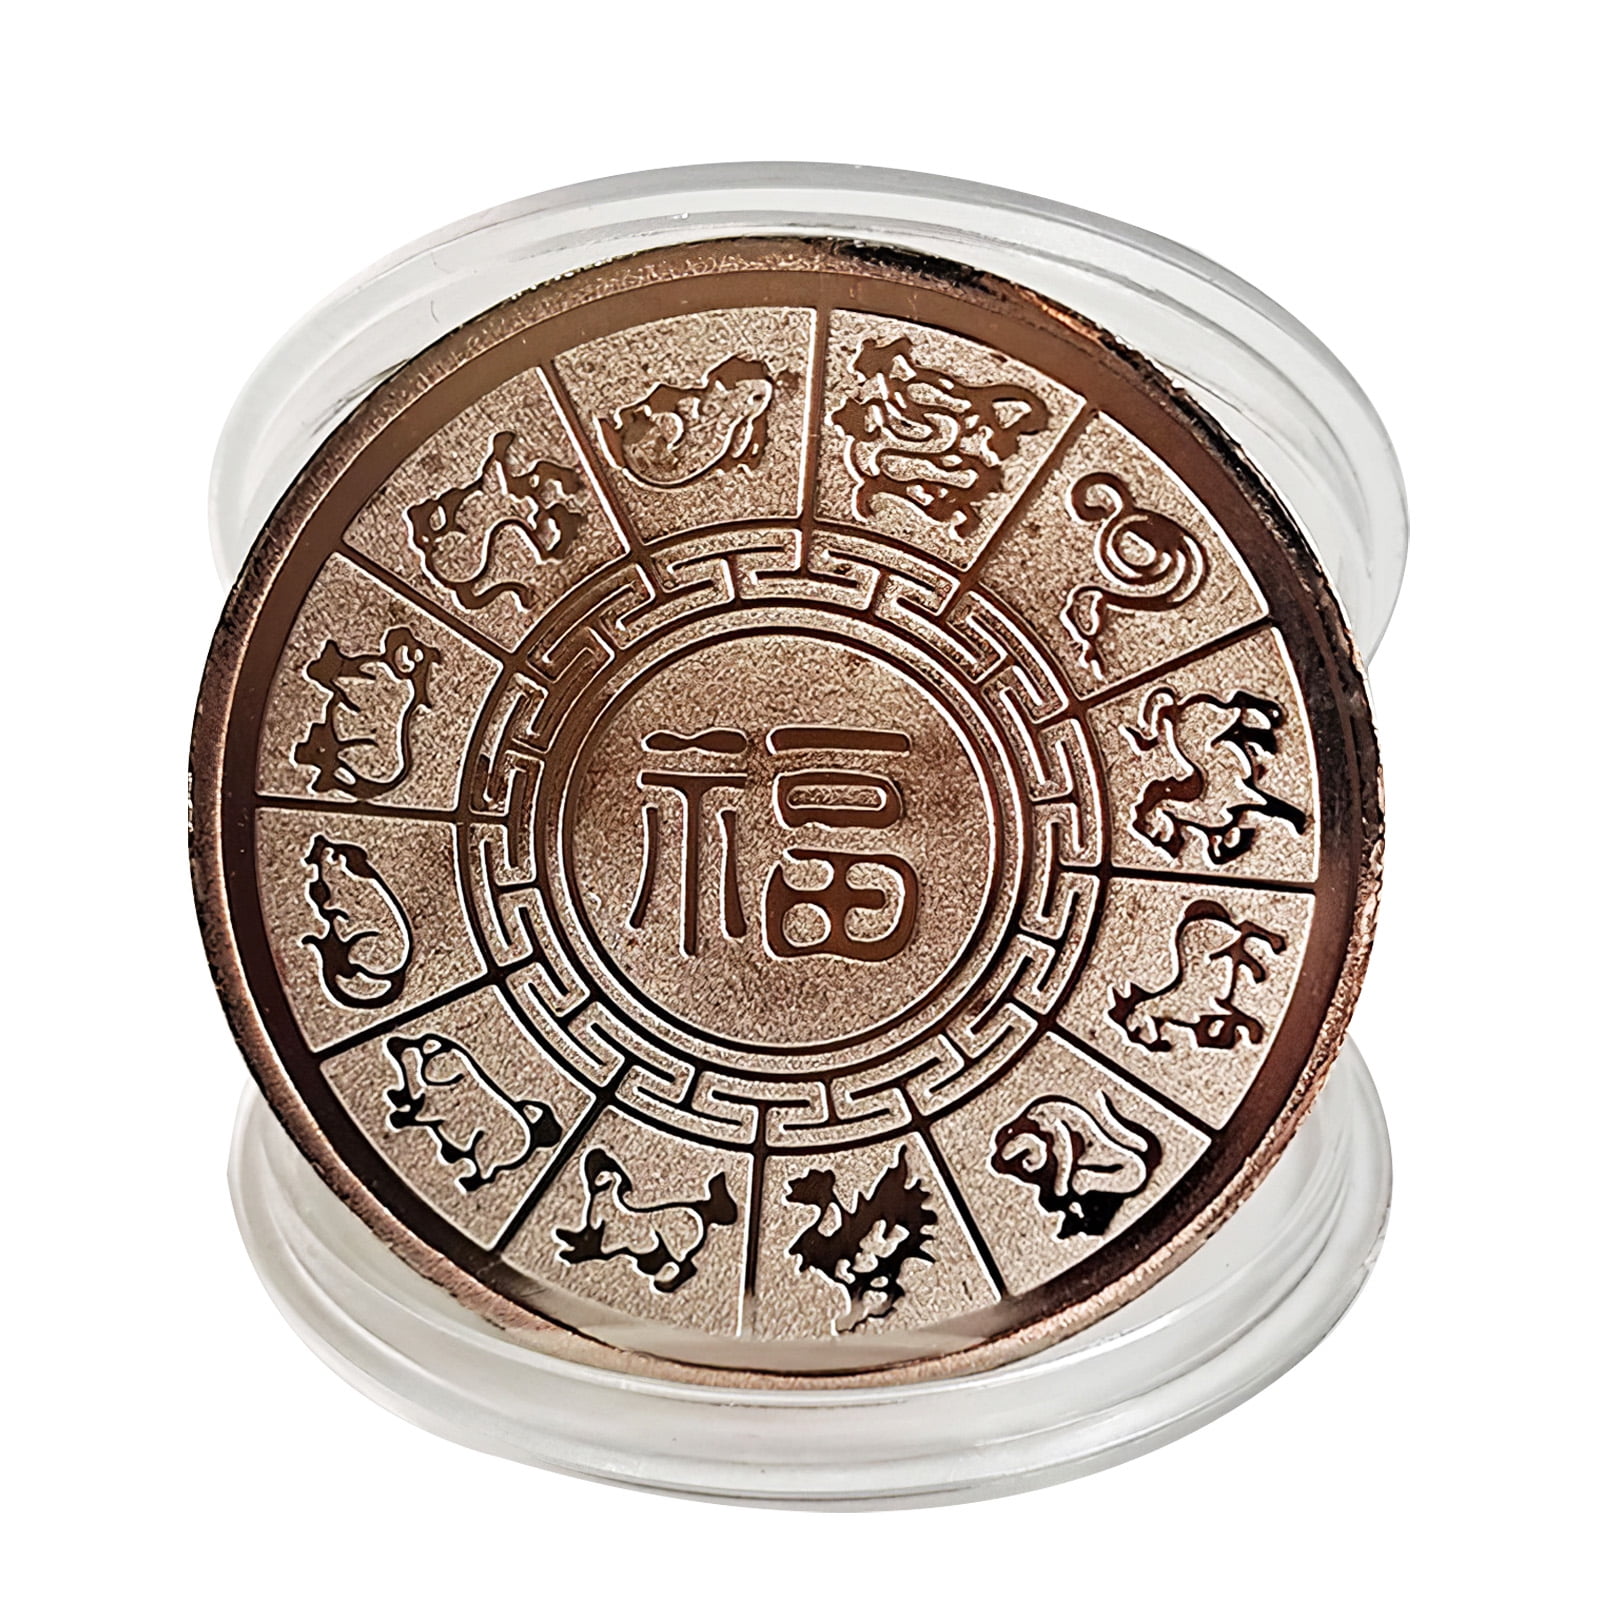 vegan Plated Prophecy Mayan Aztec Calendar Collection Commemorative Coin Gift Craft Decor,Silver 